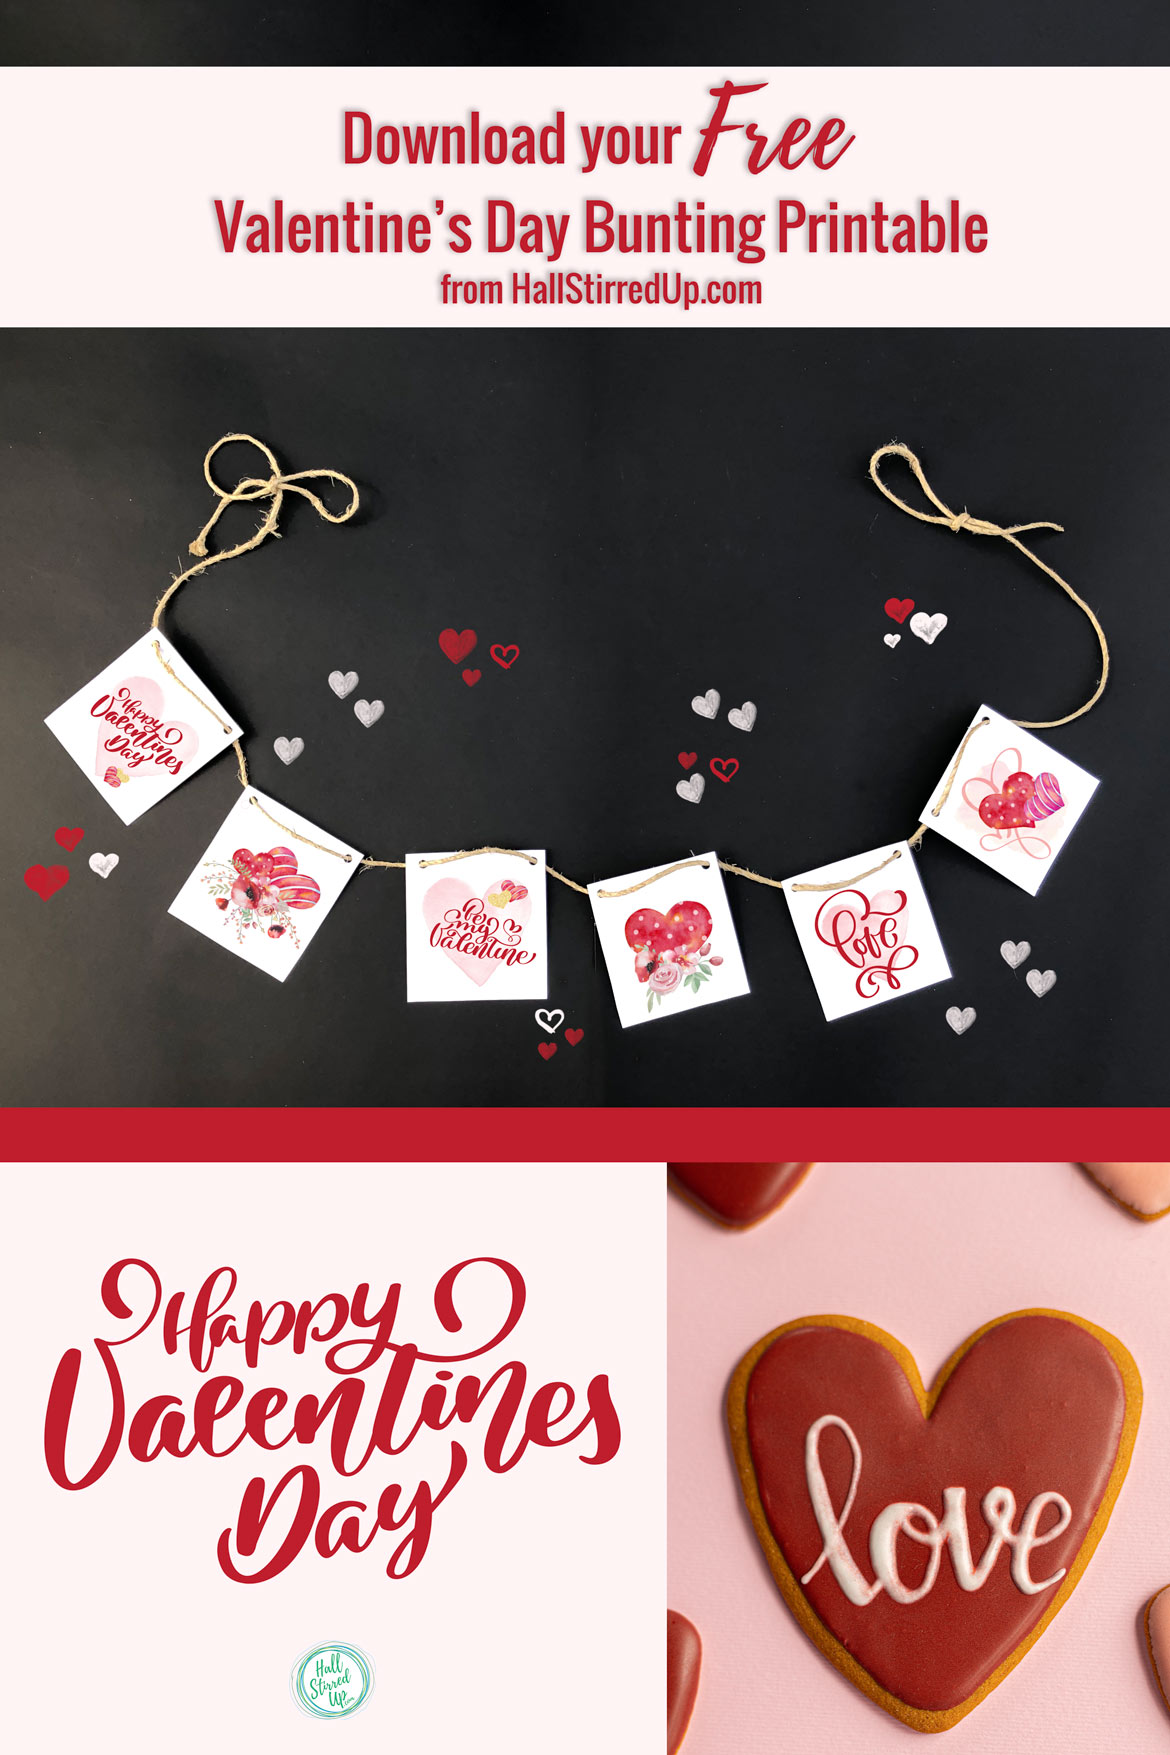 Celebrate Valentine's Day with a fun printable bunting!